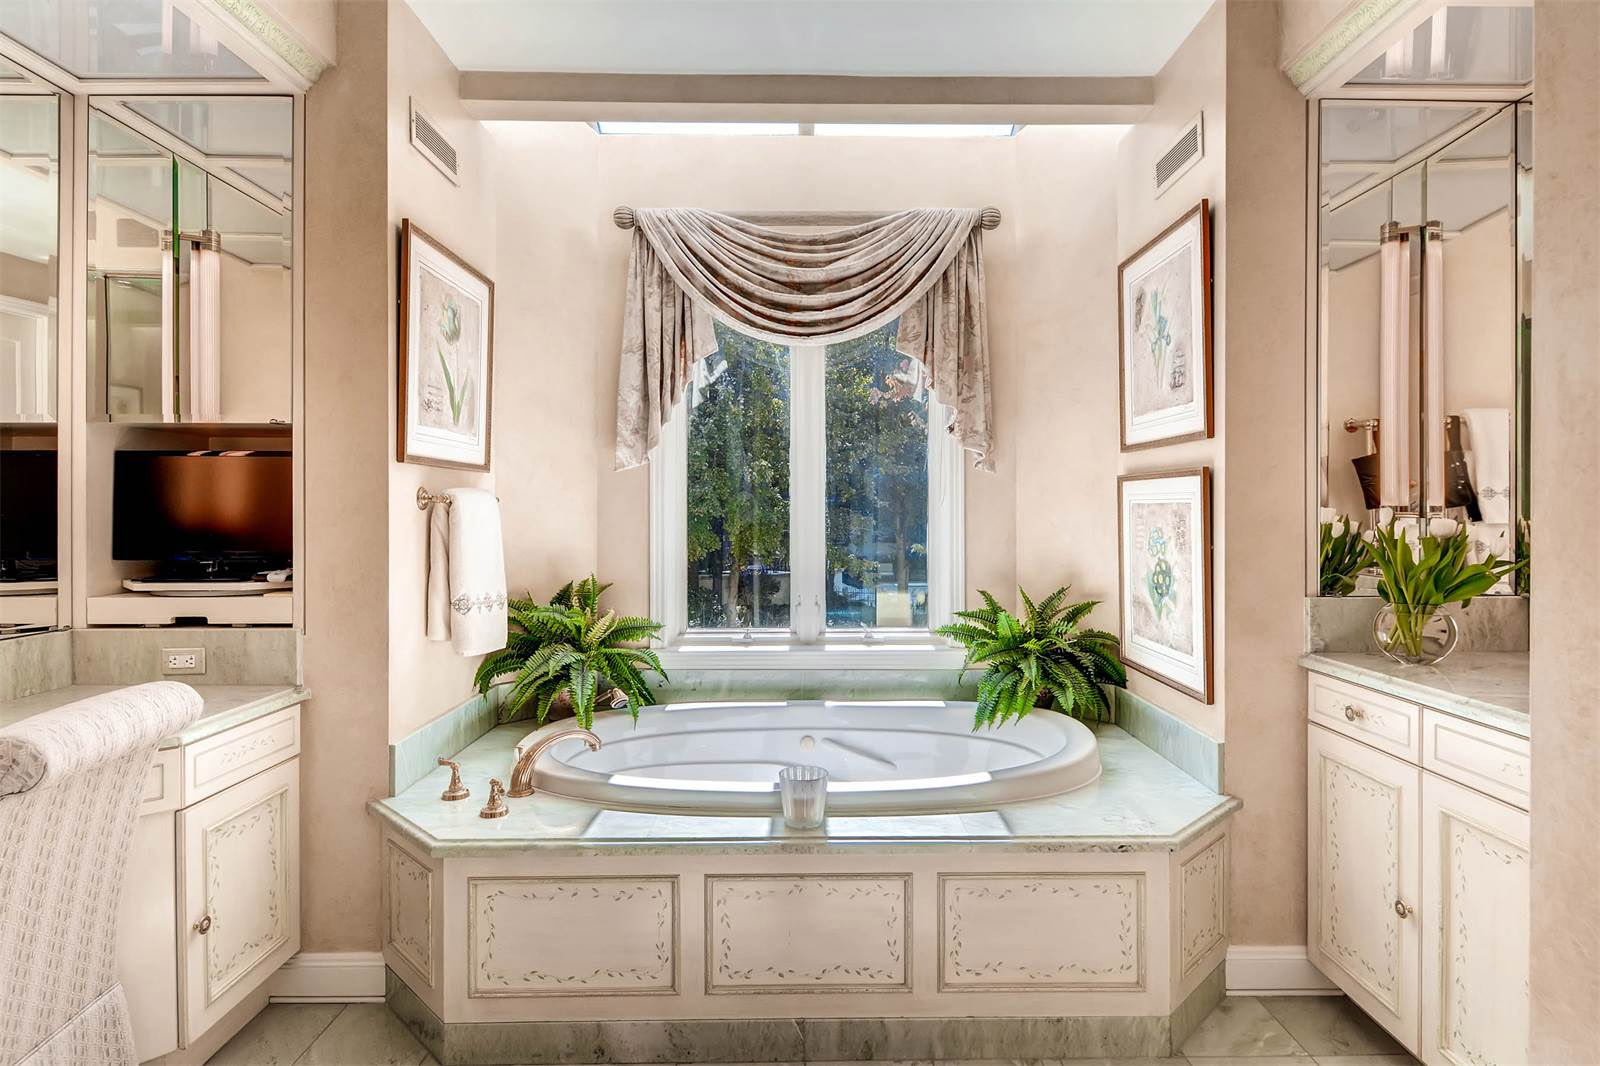 The main home has 10 full bathrooms. (Courtesy Monument Sotheby's International Realty)